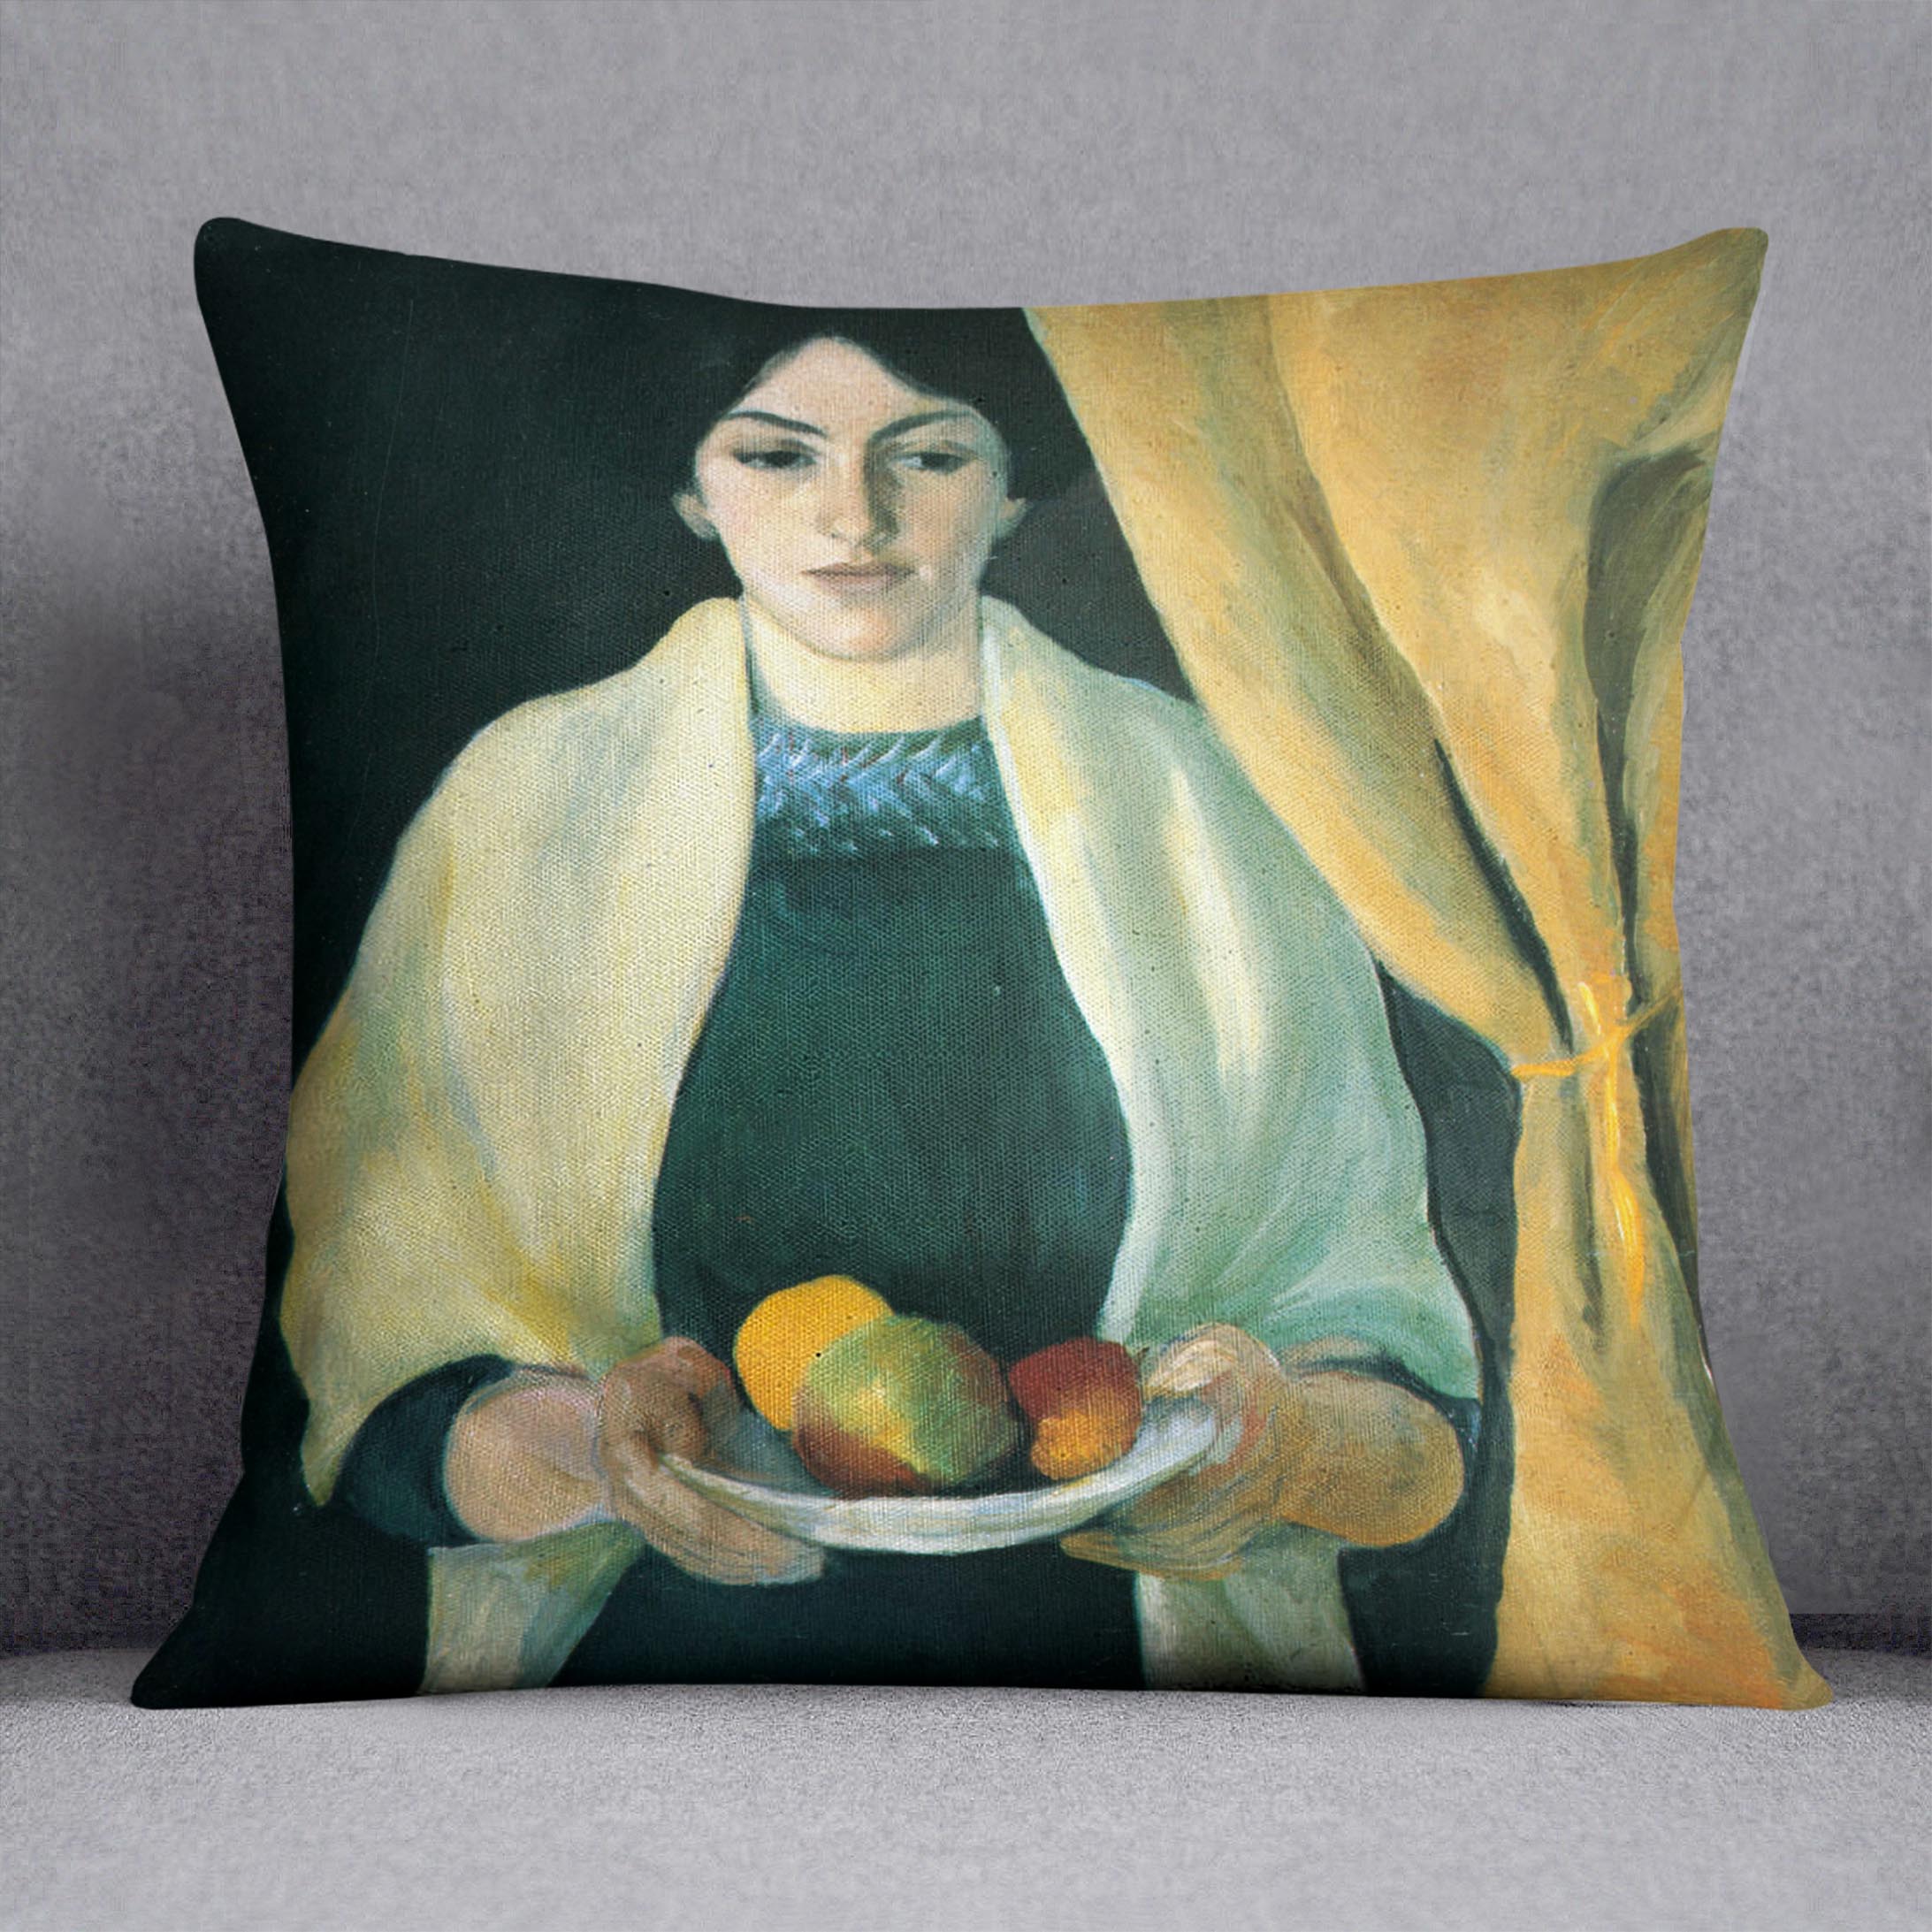 Portrait with apples portrait of the wife of the artist by Macke Cushion - Canvas Art Rocks - 1